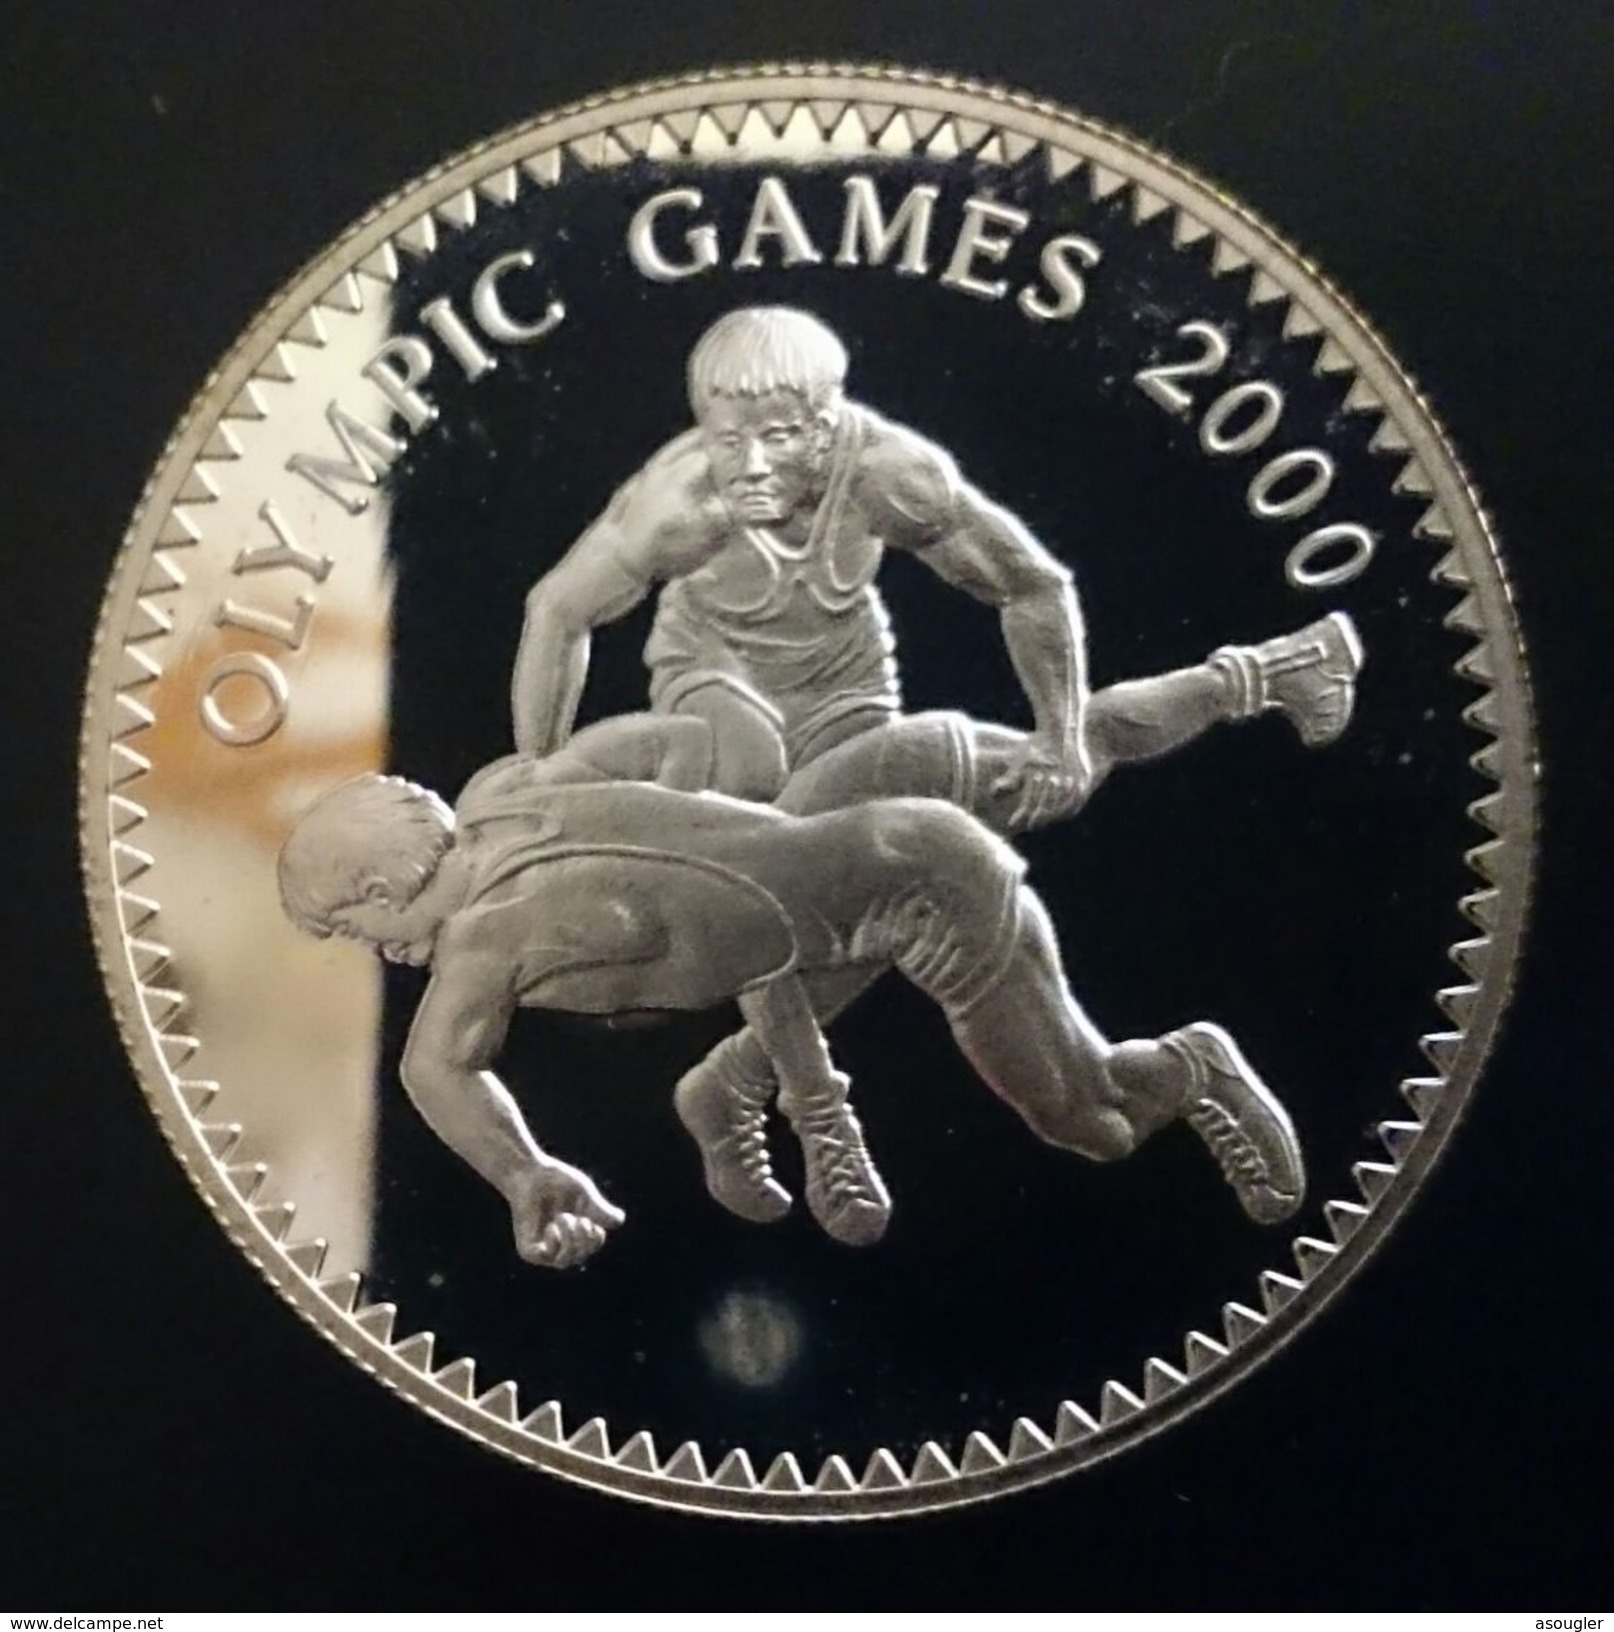 MONGOLIA 500 TUGRIK ND 1998 SILVER PROOF "2000 Olympics Games" Free Shipping Via Registered Air Mail - Mongolia